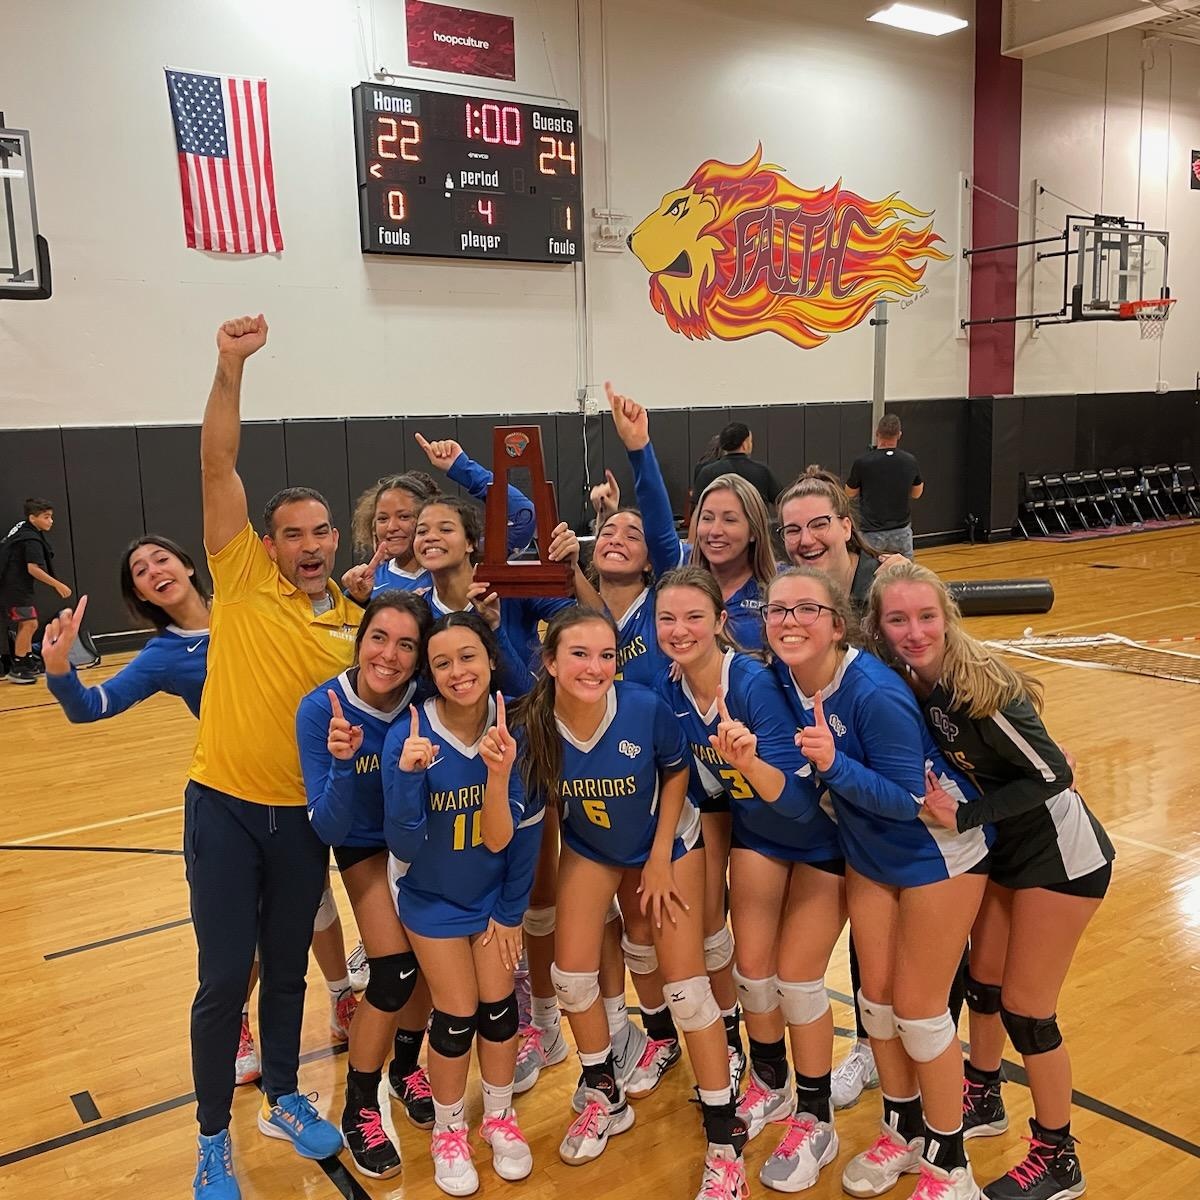 🚨DISTRICT CHAMPIONS!!! For the FIRST TIME in school history #OCPVOLLEYBALL wins a district championship with 3-1 victory over Faith Christian. The Lady Warriors will host a Regional Qtrfinals match next wk #HistoryMakers #FHSAA @osvarsity @VSNOrlando